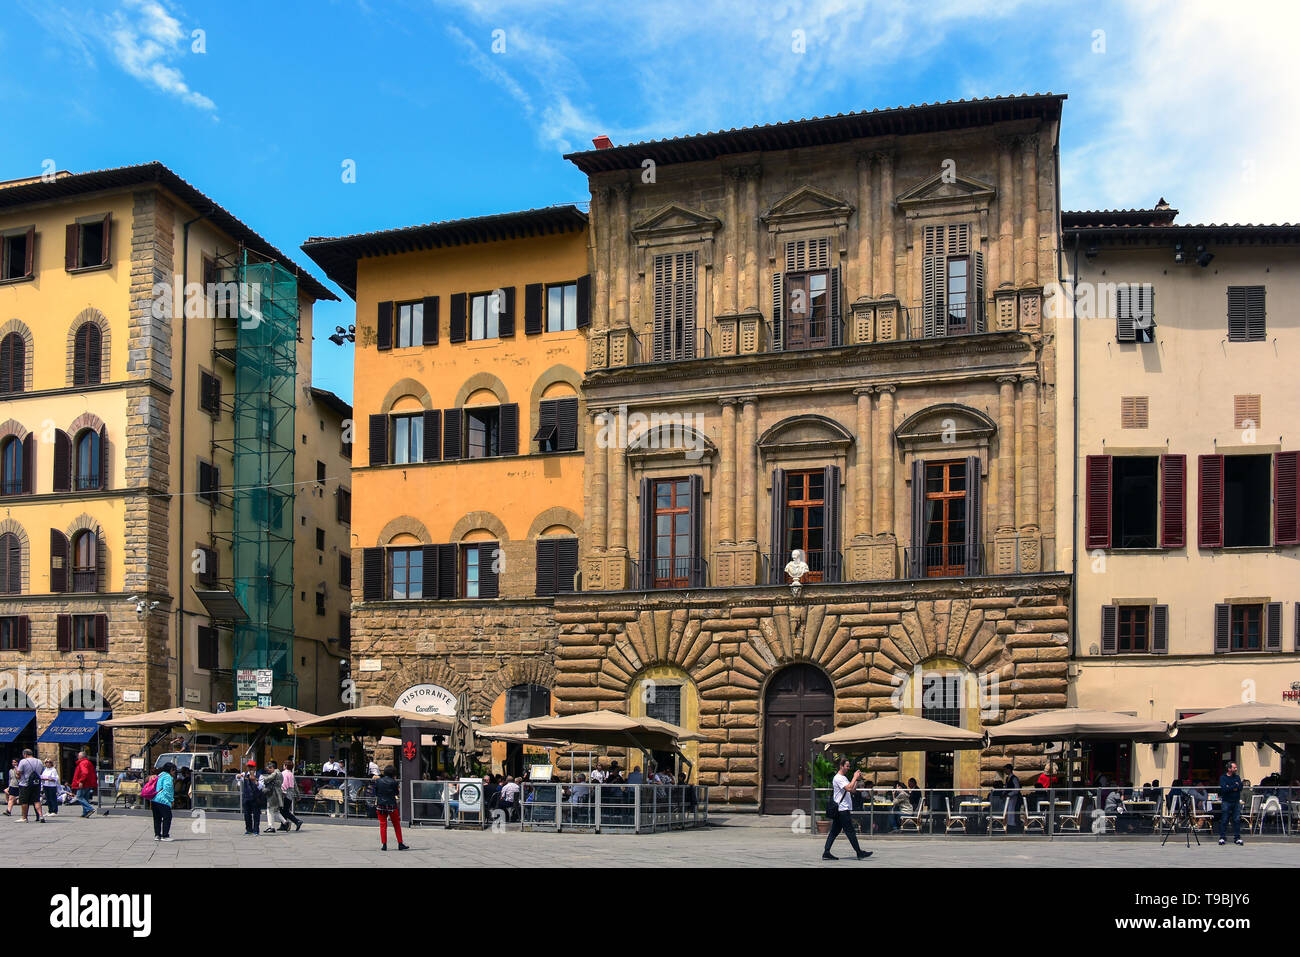 Florence, Italy - May 10, 2018: Tourists dine in the restaurants of the famous Piazza Santa Croce. Stock Photo